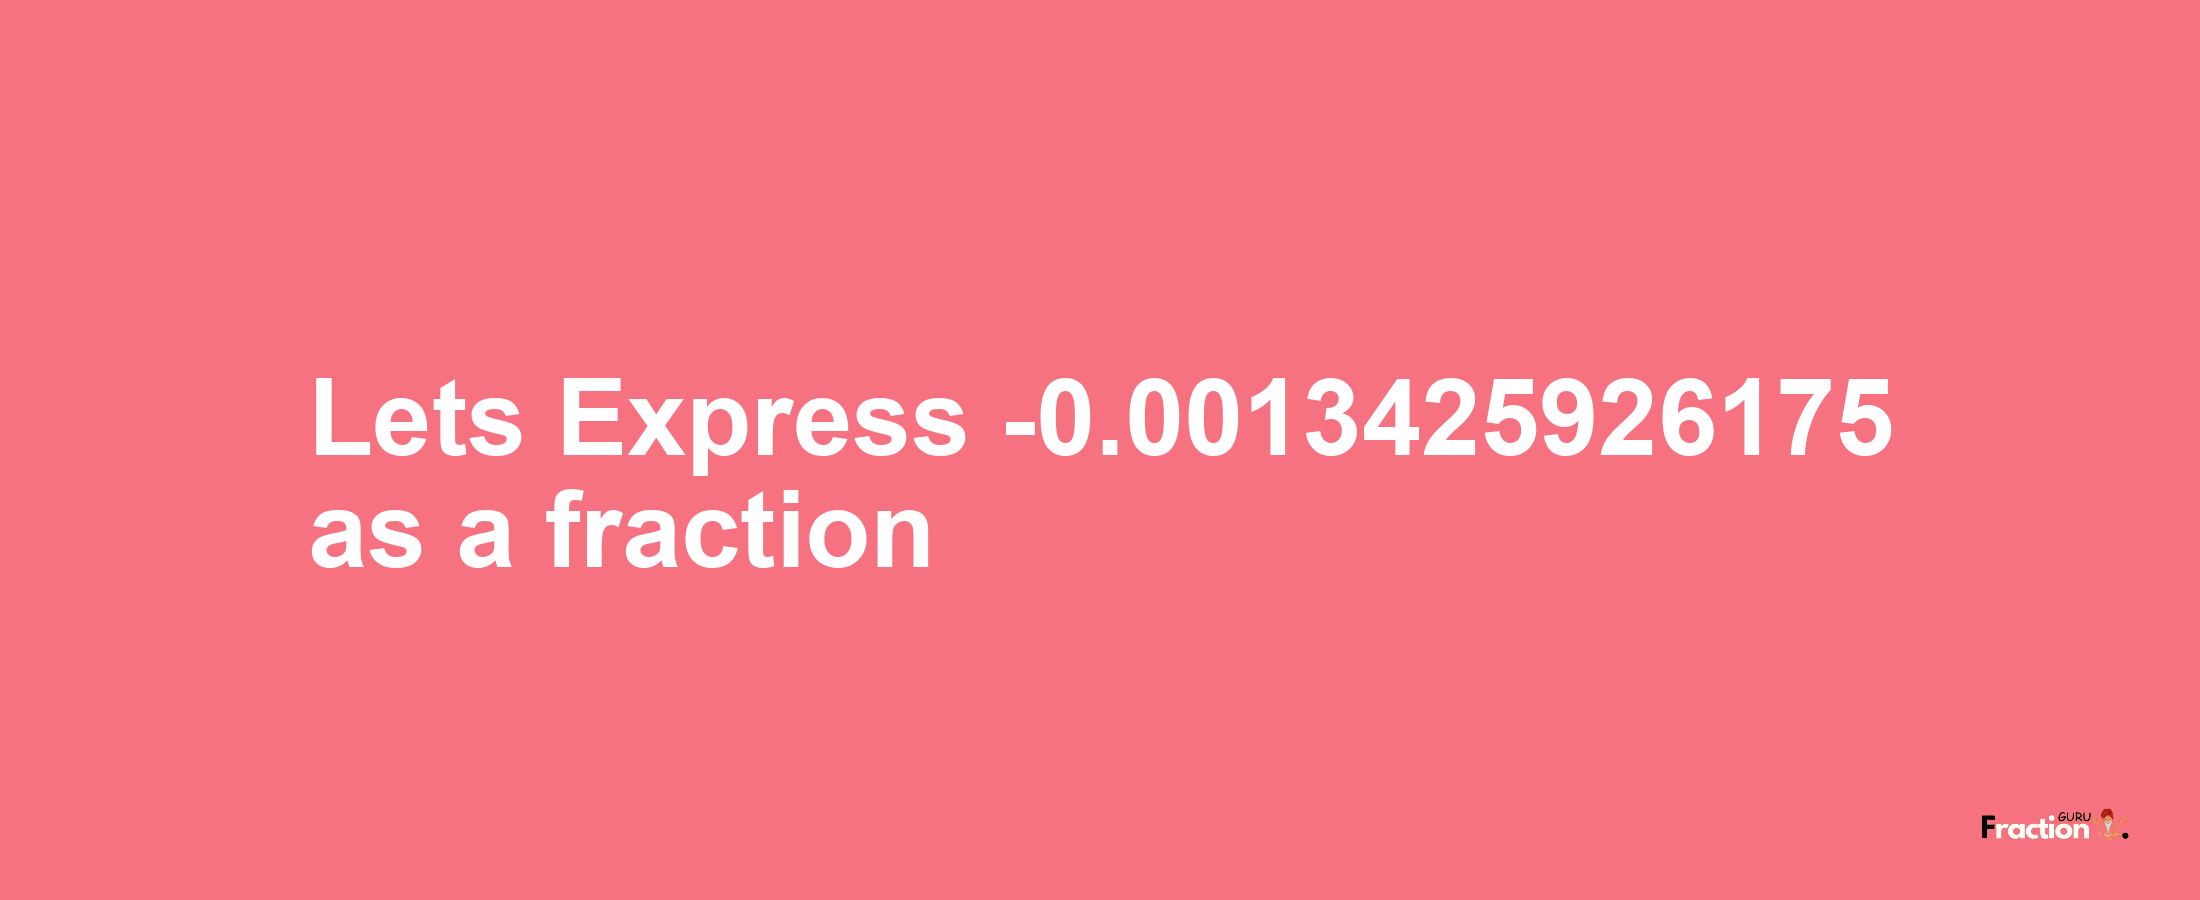 Lets Express -0.0013425926175 as afraction